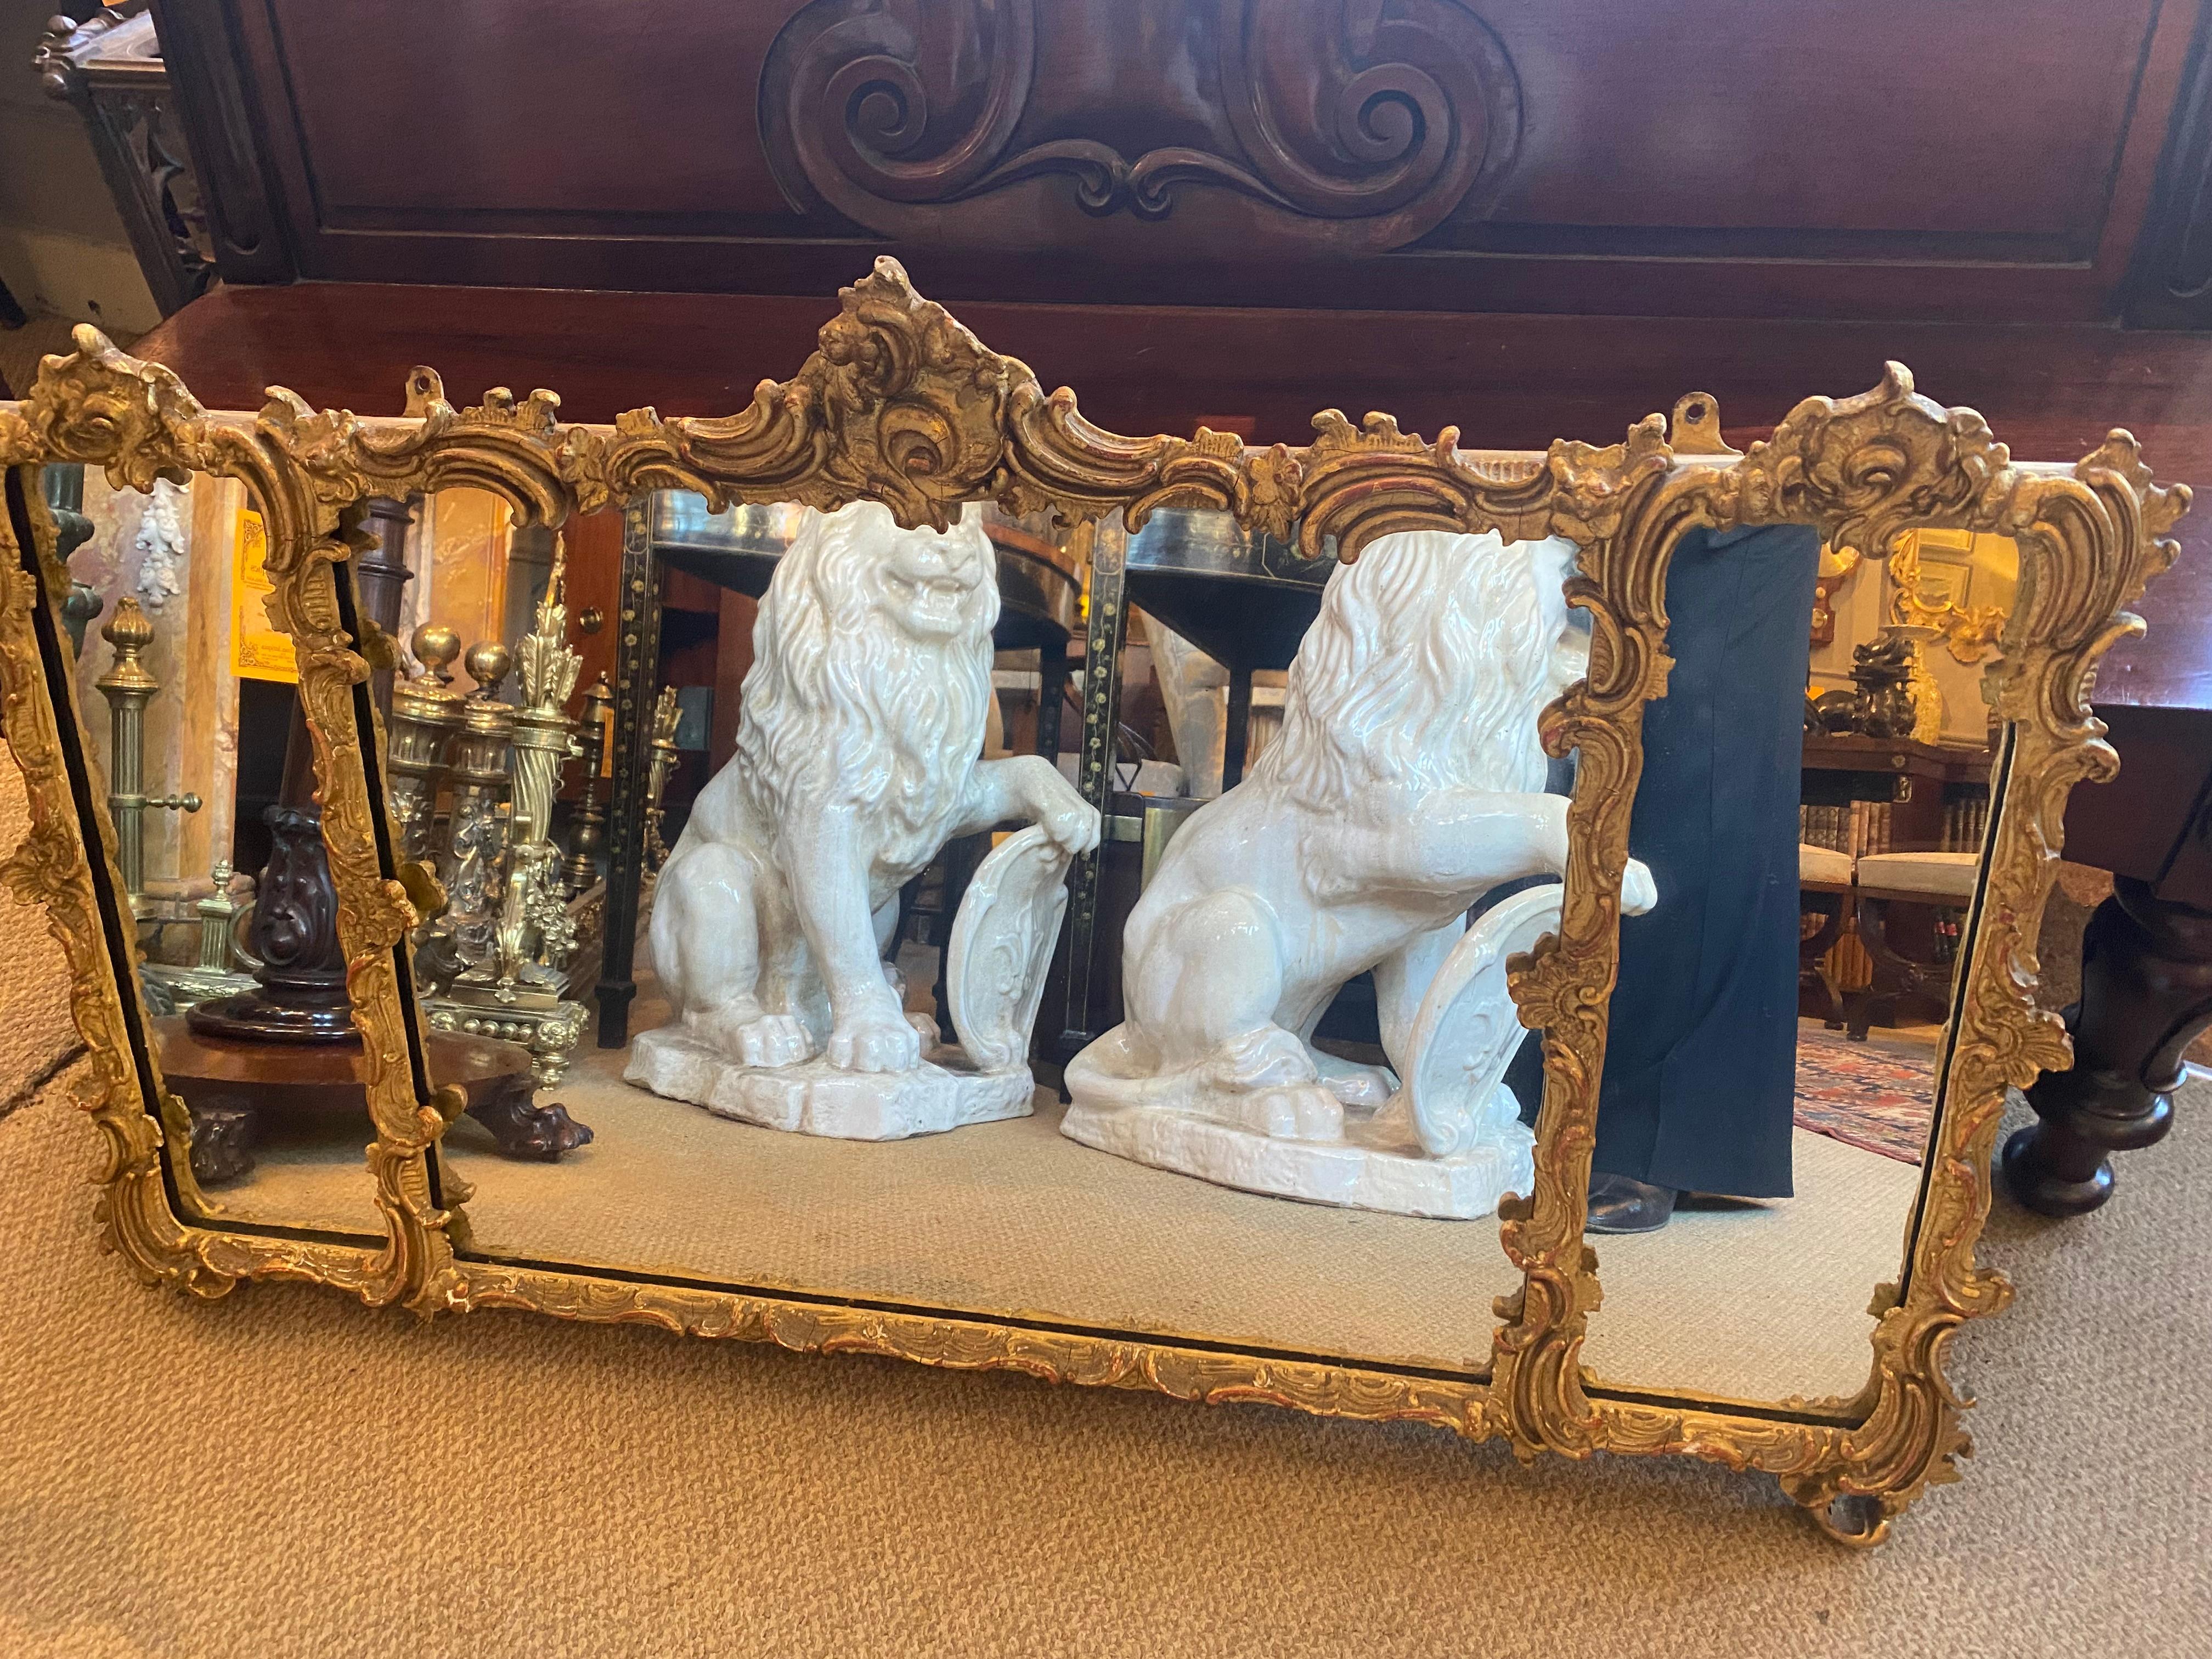 19th Century Ornately Decorated Regency Gilt Overmantel Mirror For Sale 1